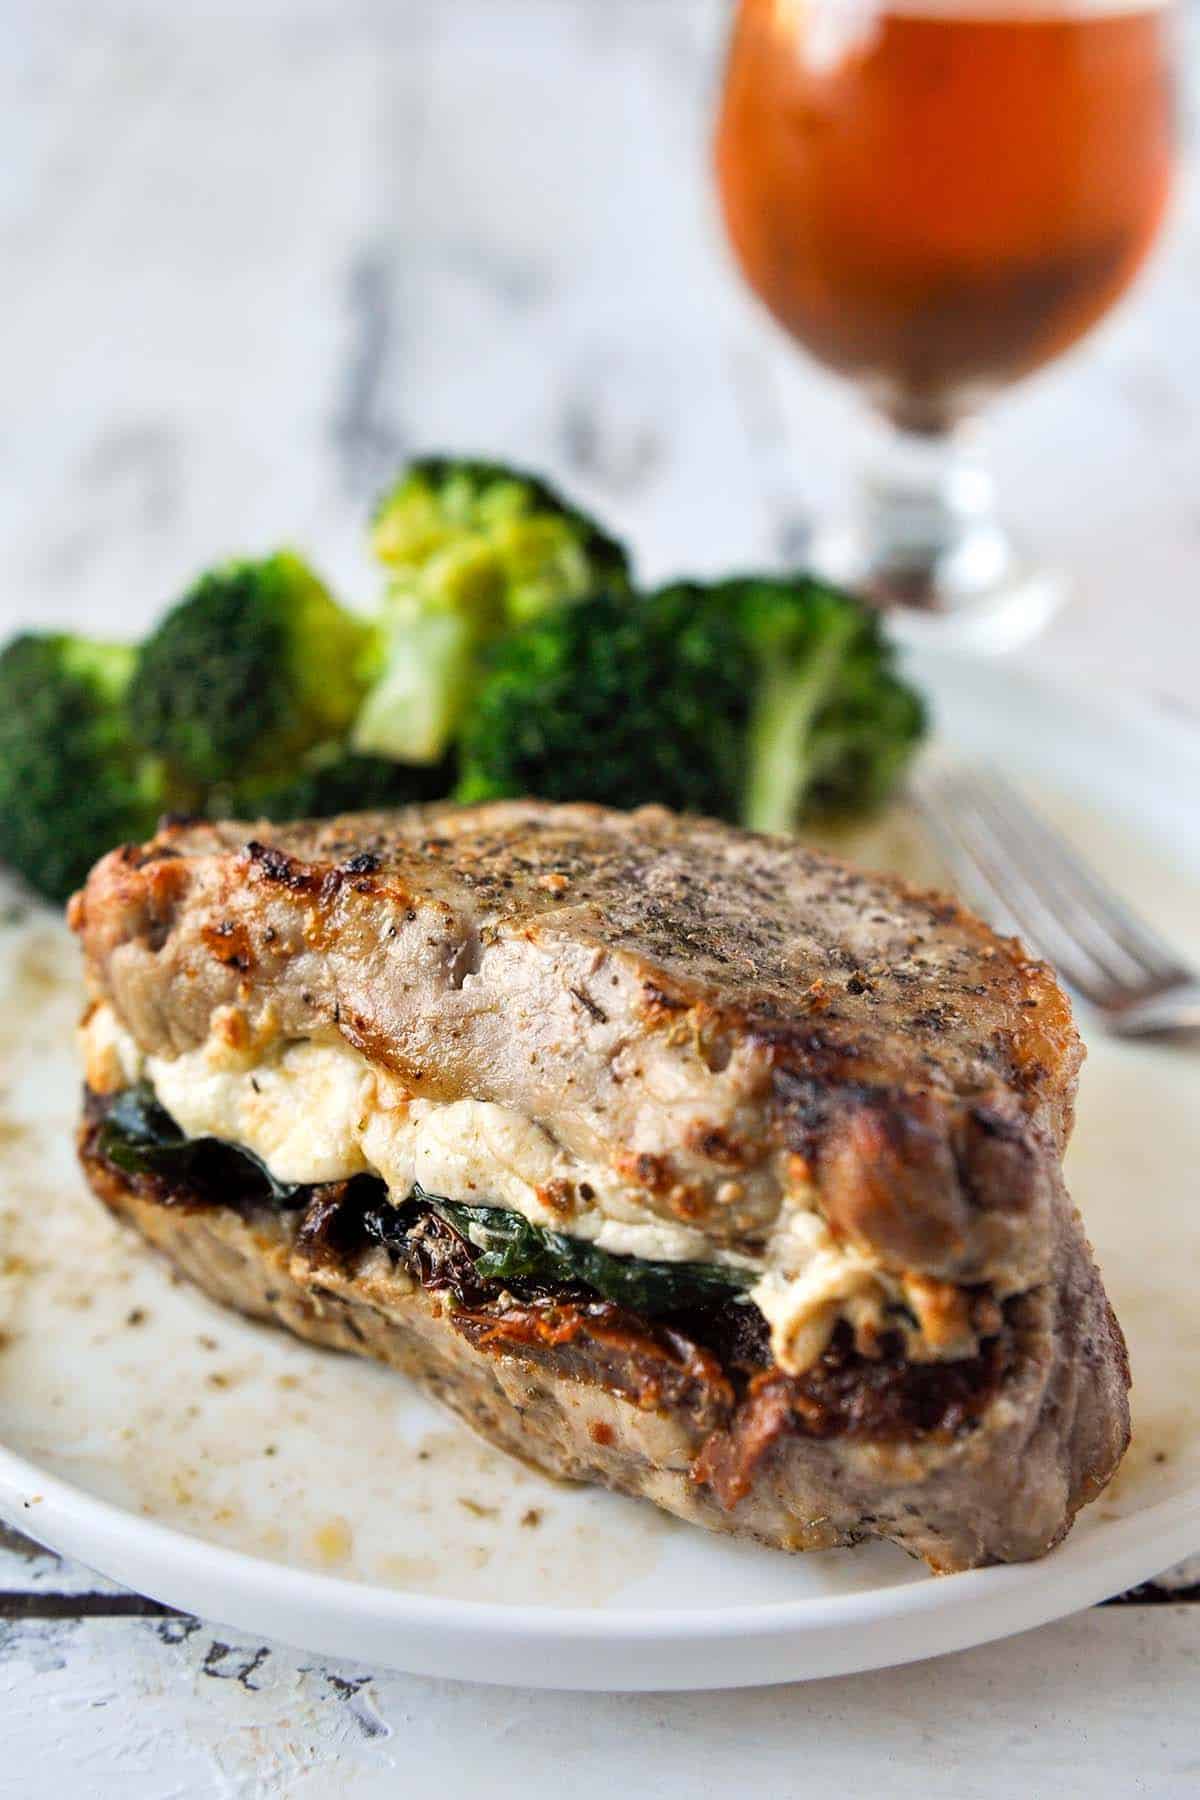 Delicious Stuffed Prok Chops with Sun-dried Tomatoes, Spinach & Cheese on a white plate.